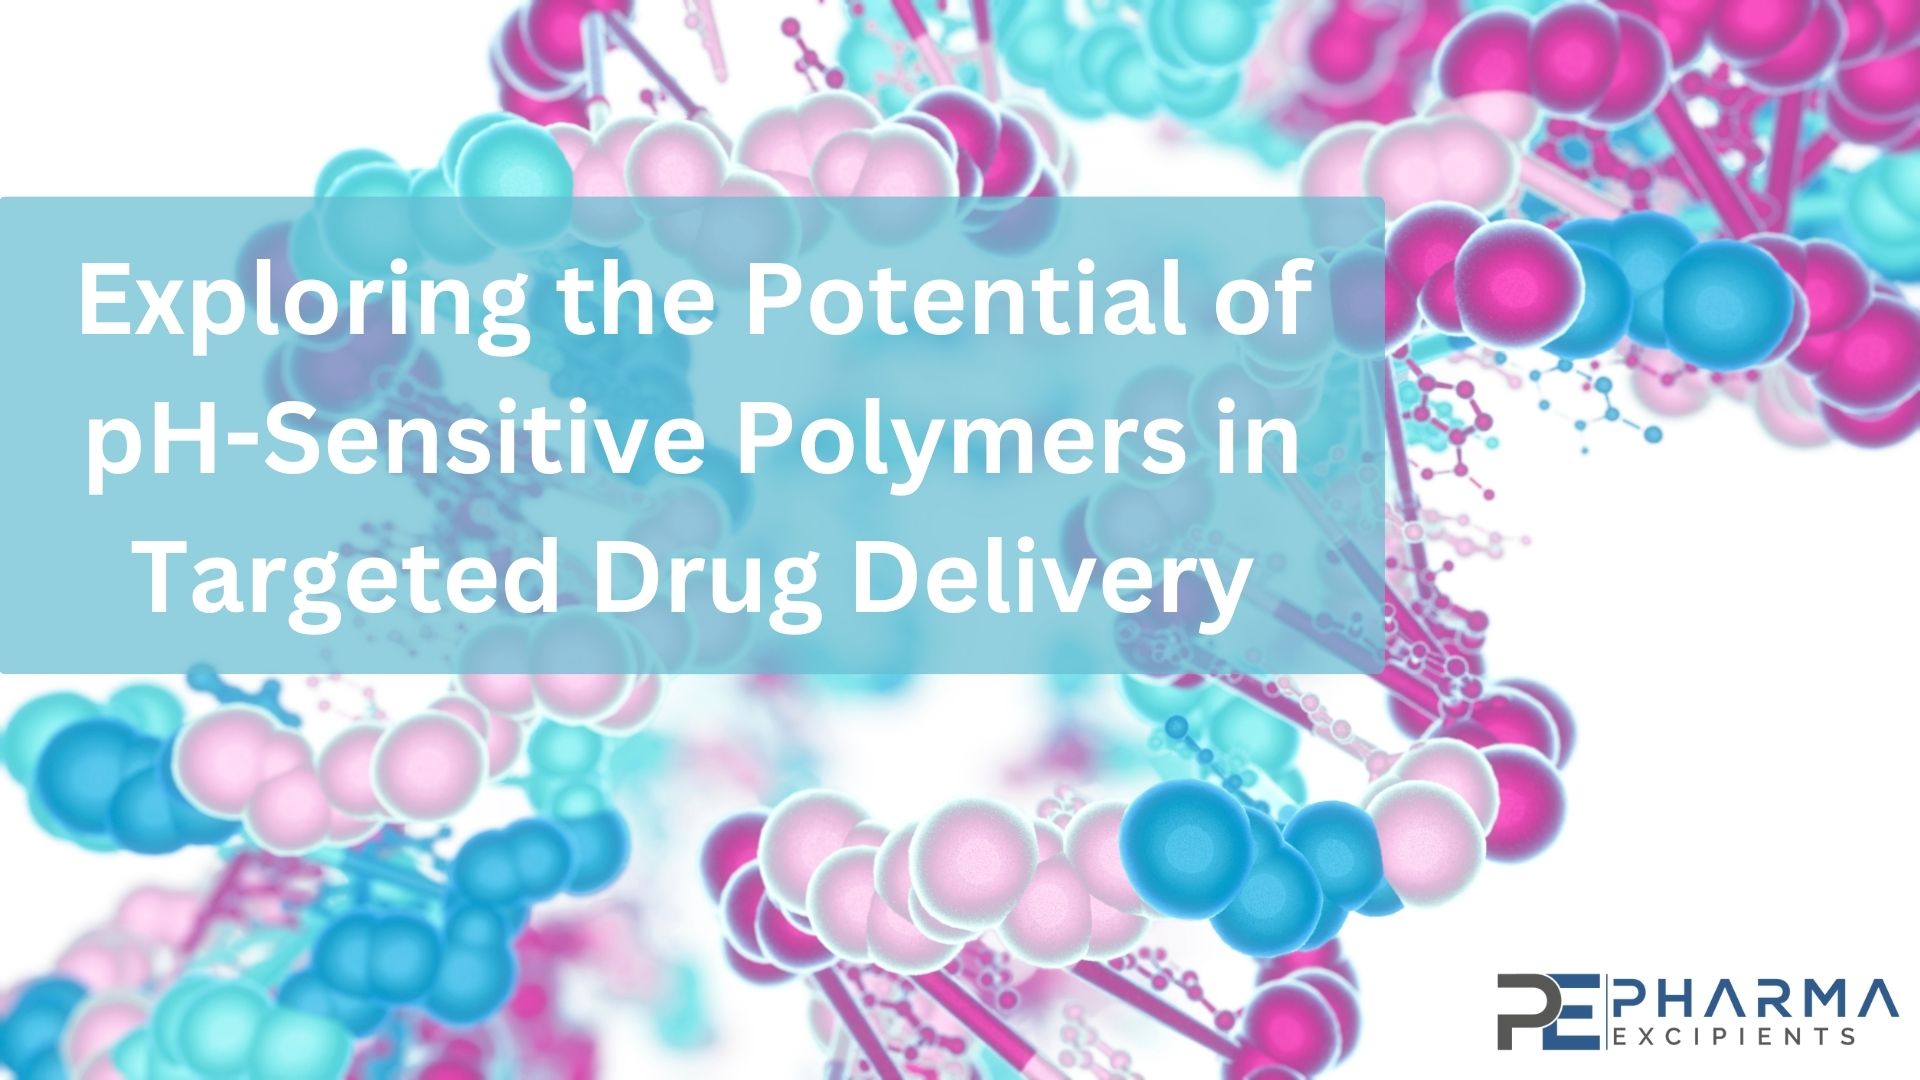 Exploring the Potential of pH-Sensitive Polymers in Targeted Drug Delivery